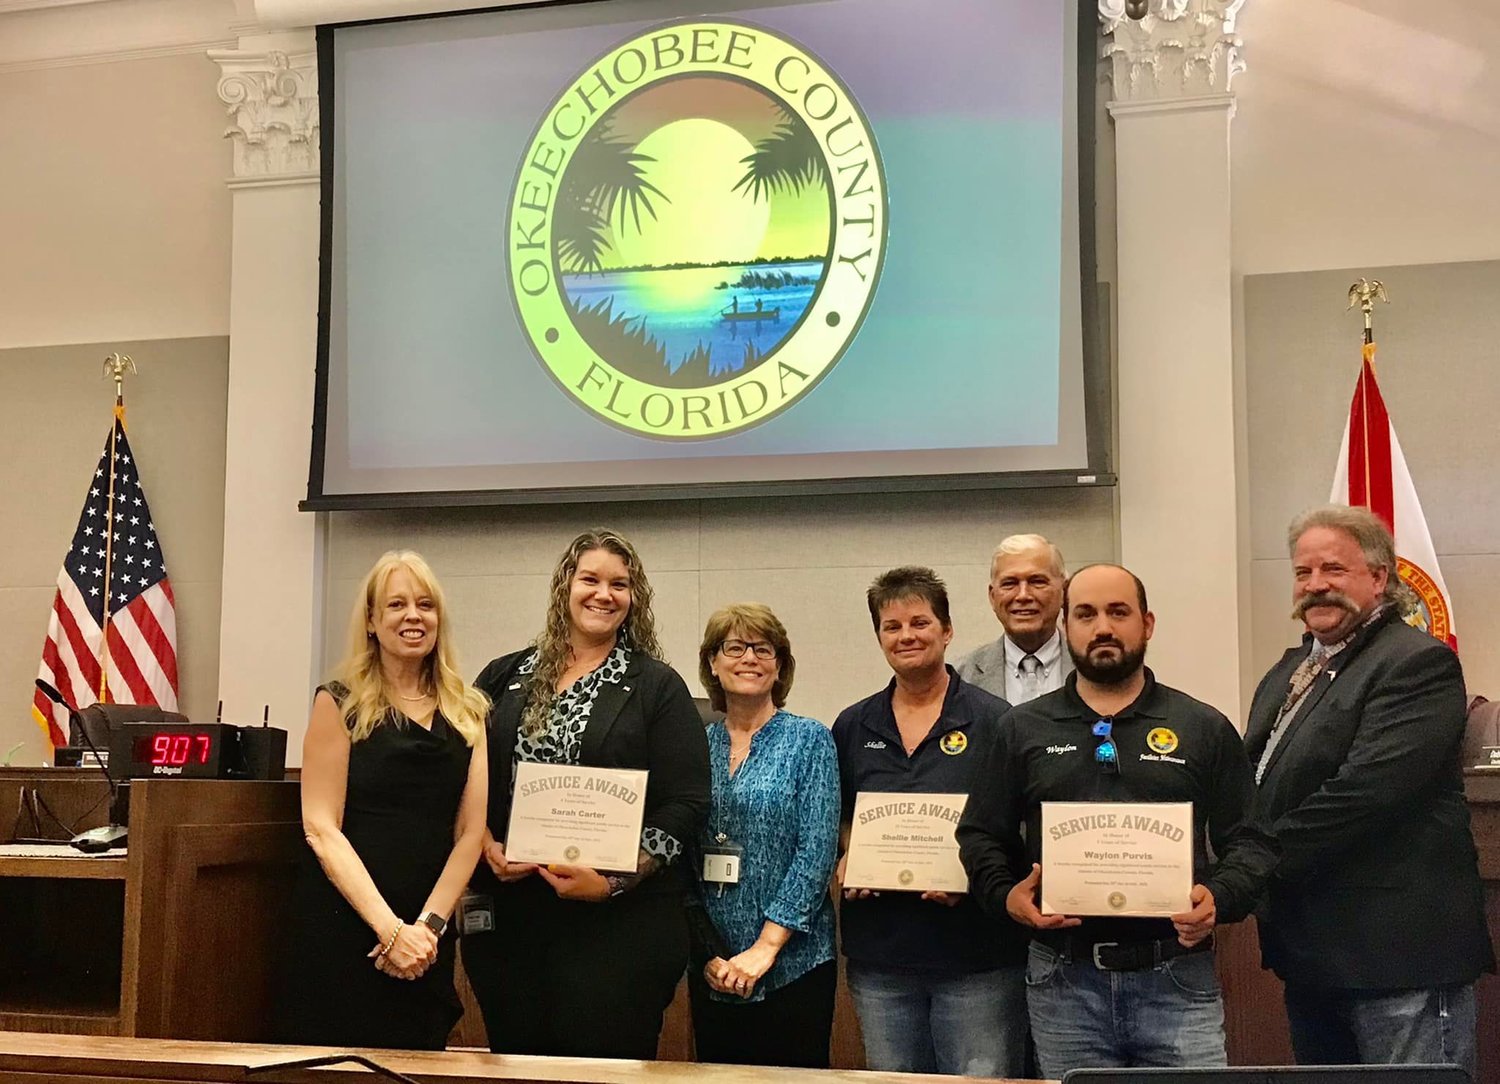 At their July 28 meeting, Okeechobee County Commissioners honored employees for milestone years of service.